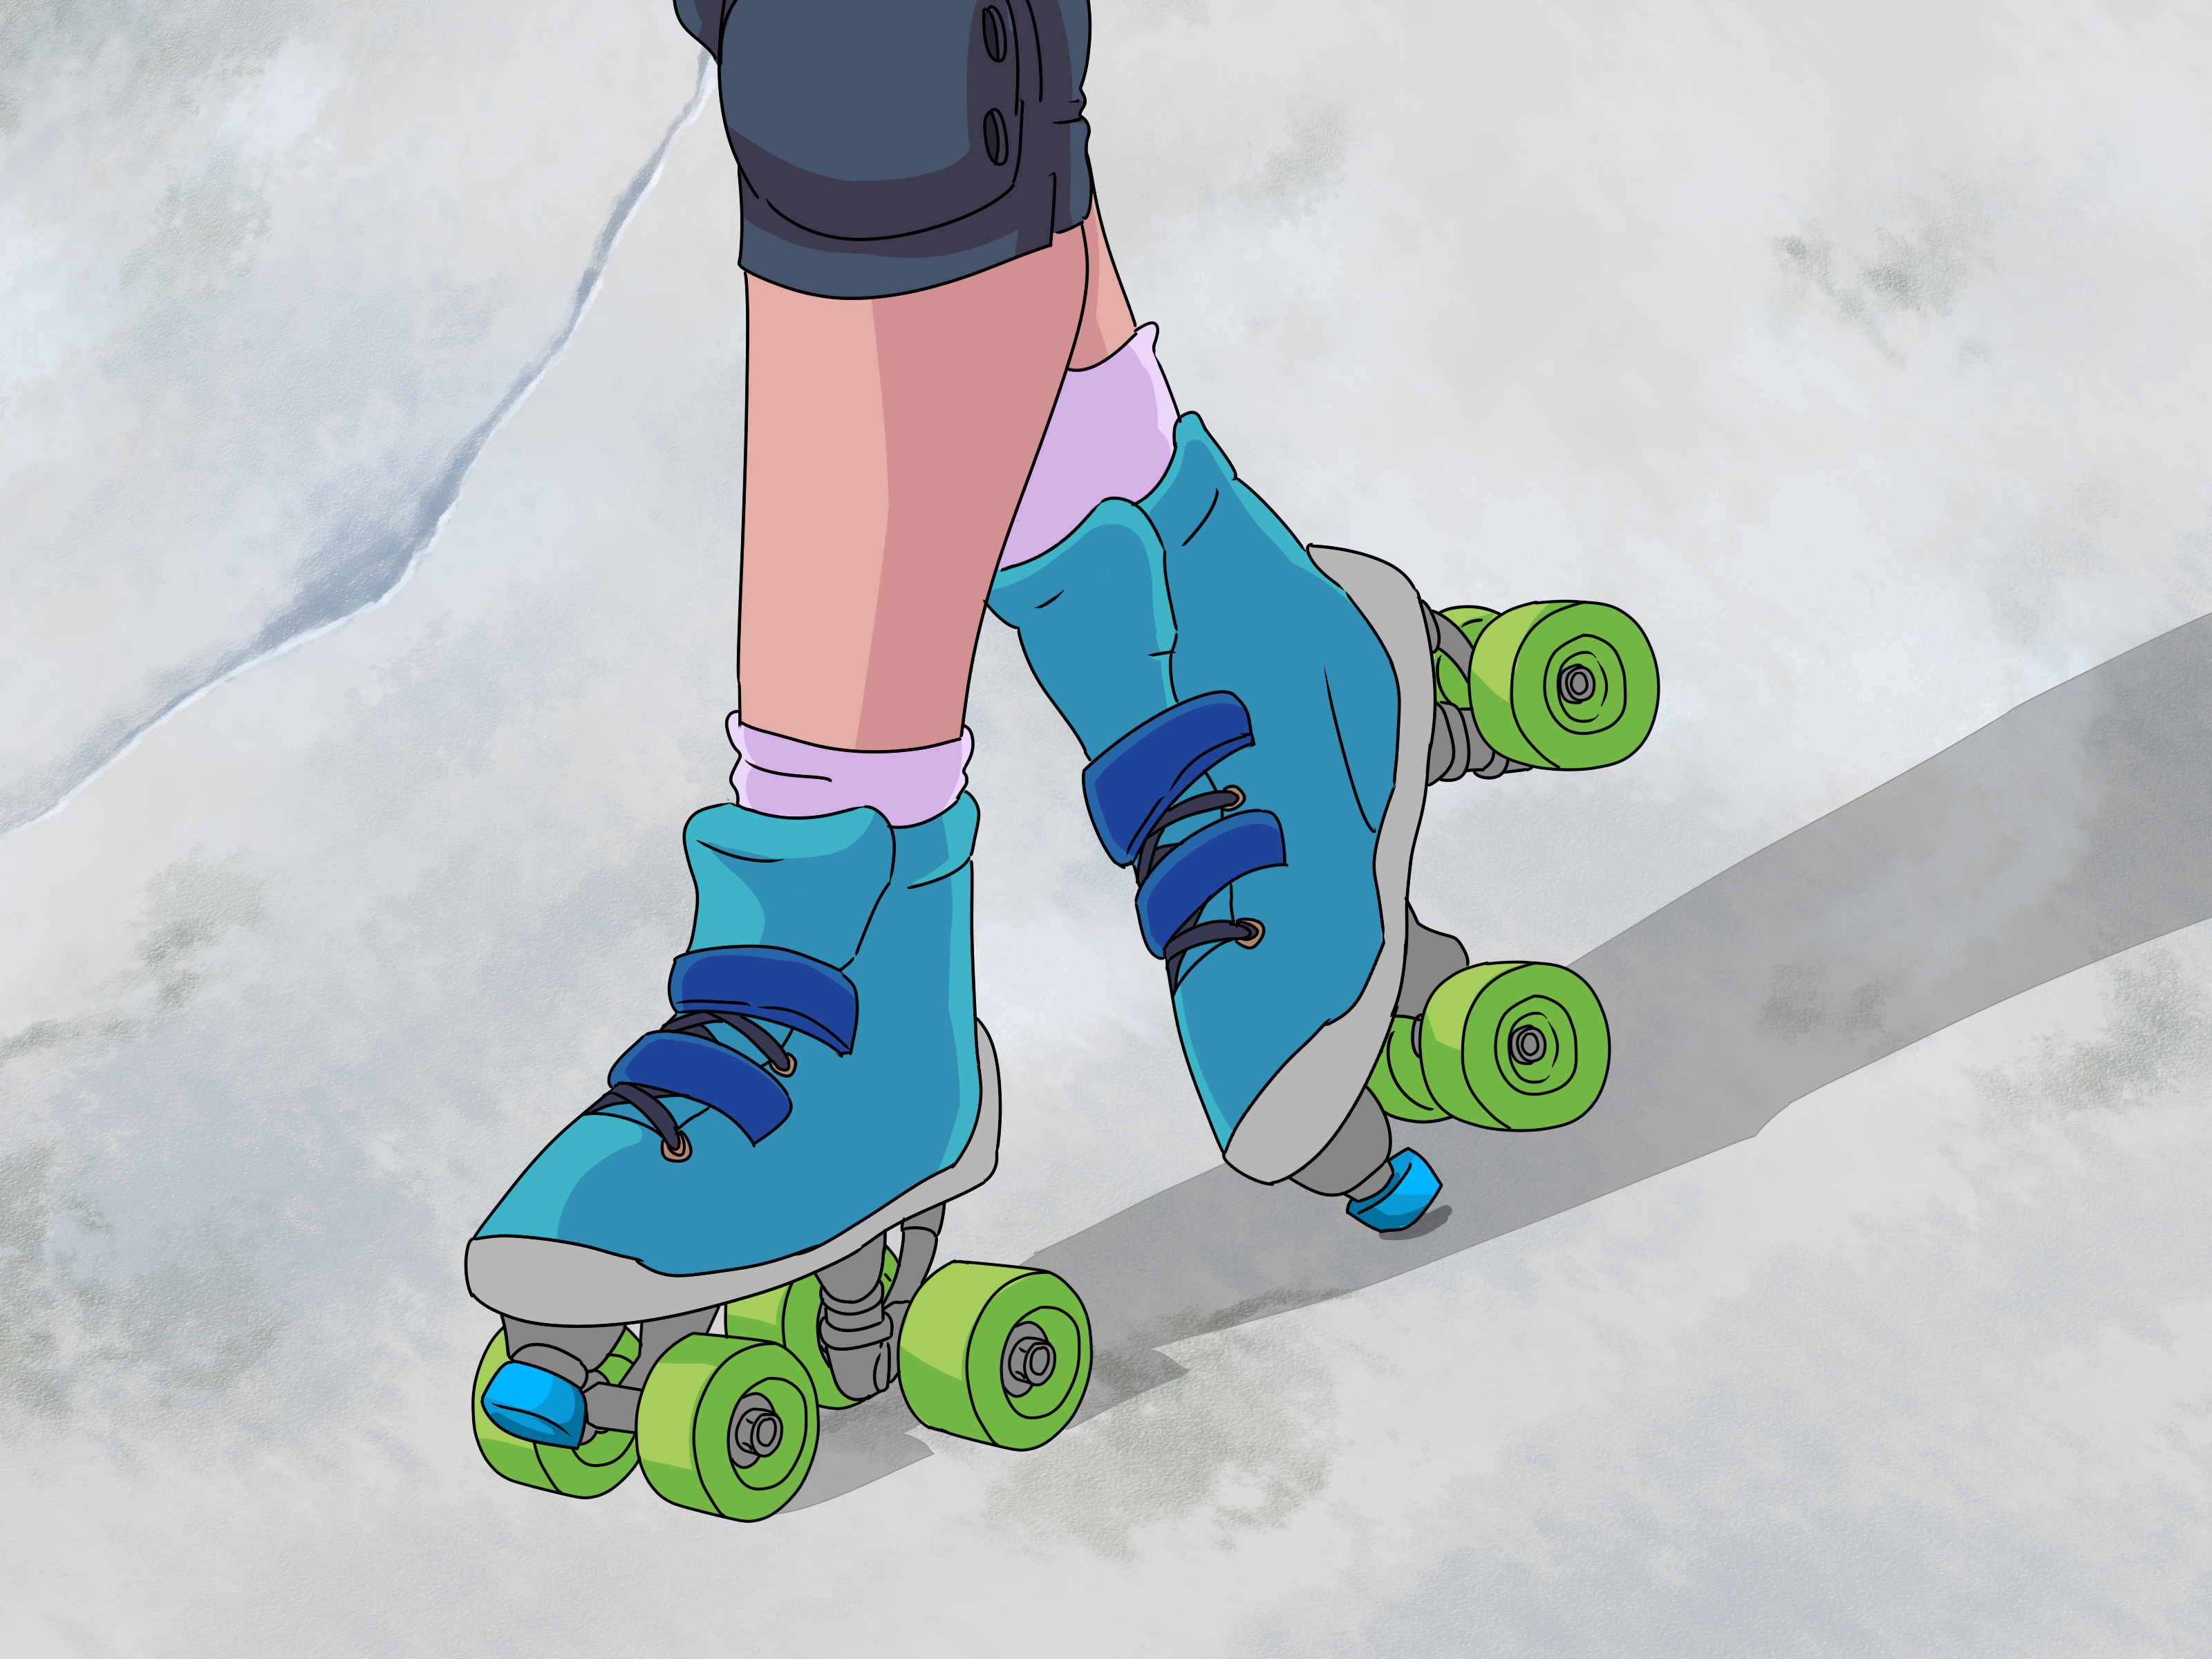 How to Roller Skate Backwards: 9 Steps (with Picture)